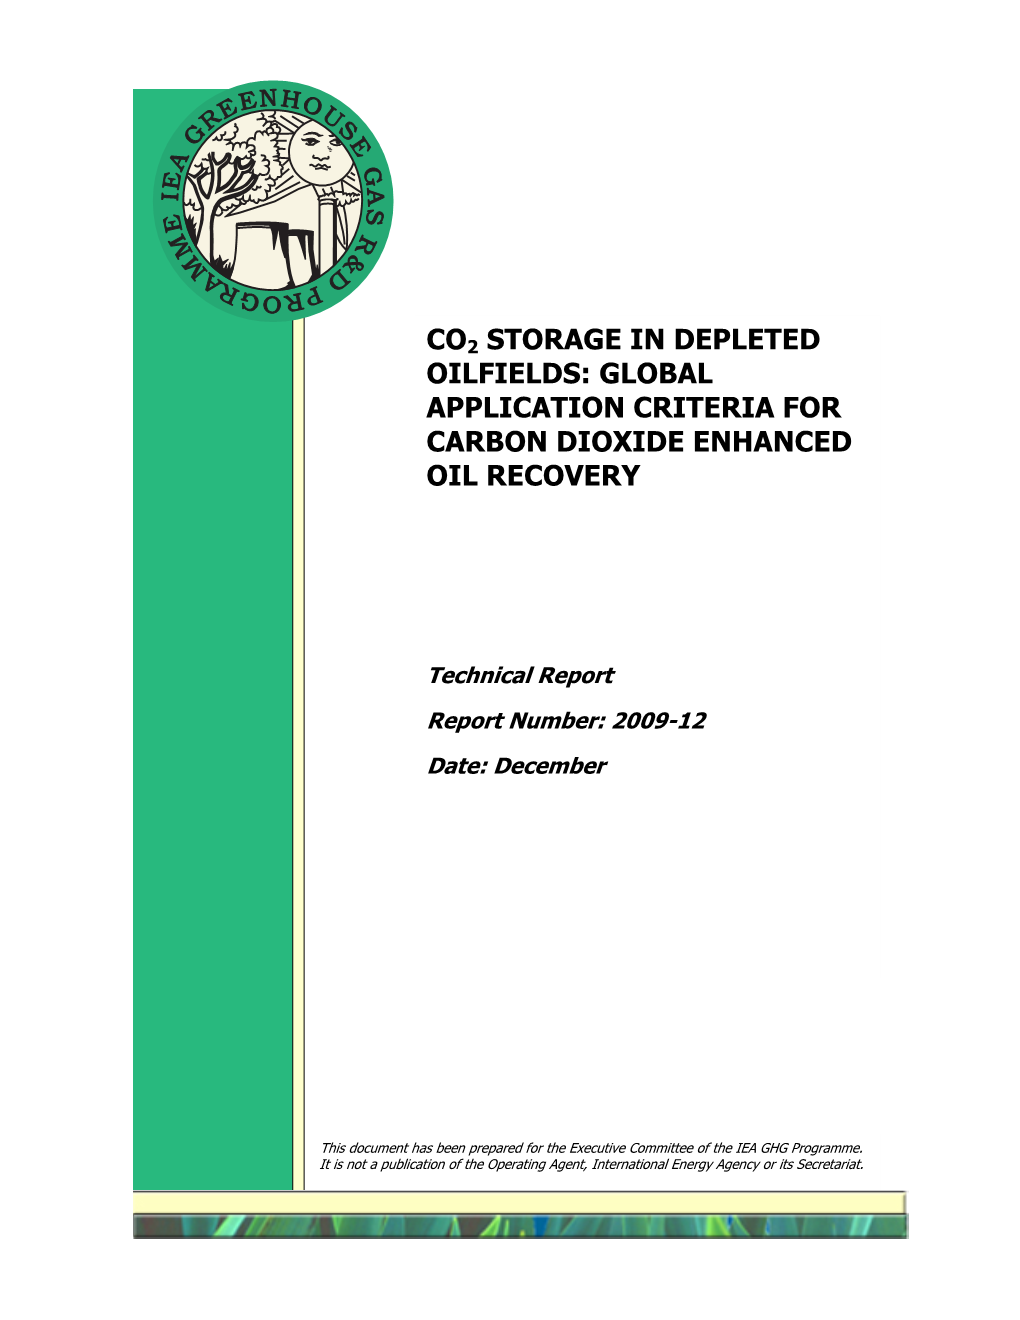 Co2 Storage in Depleted Oilfields: Global Application Criteria for Carbon Dioxide Enhanced Oil Recovery